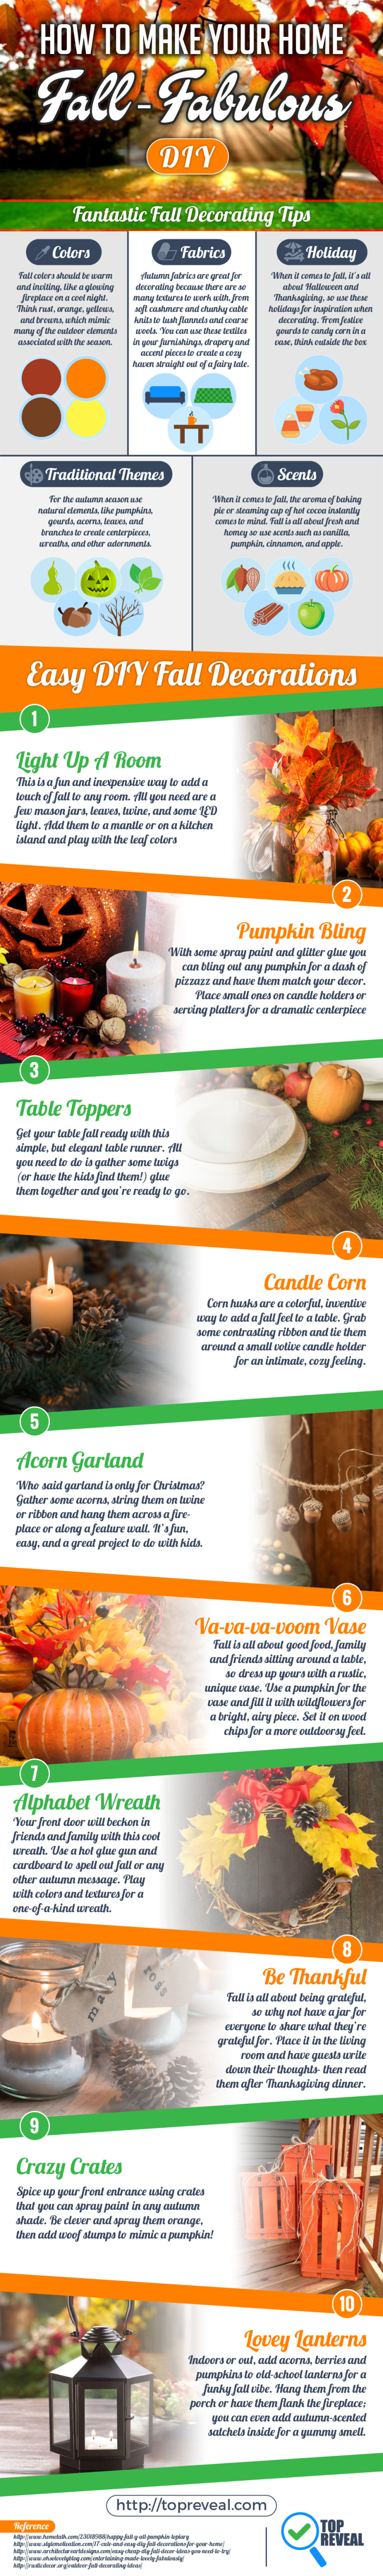 Fall Decorating Ideas Infographic